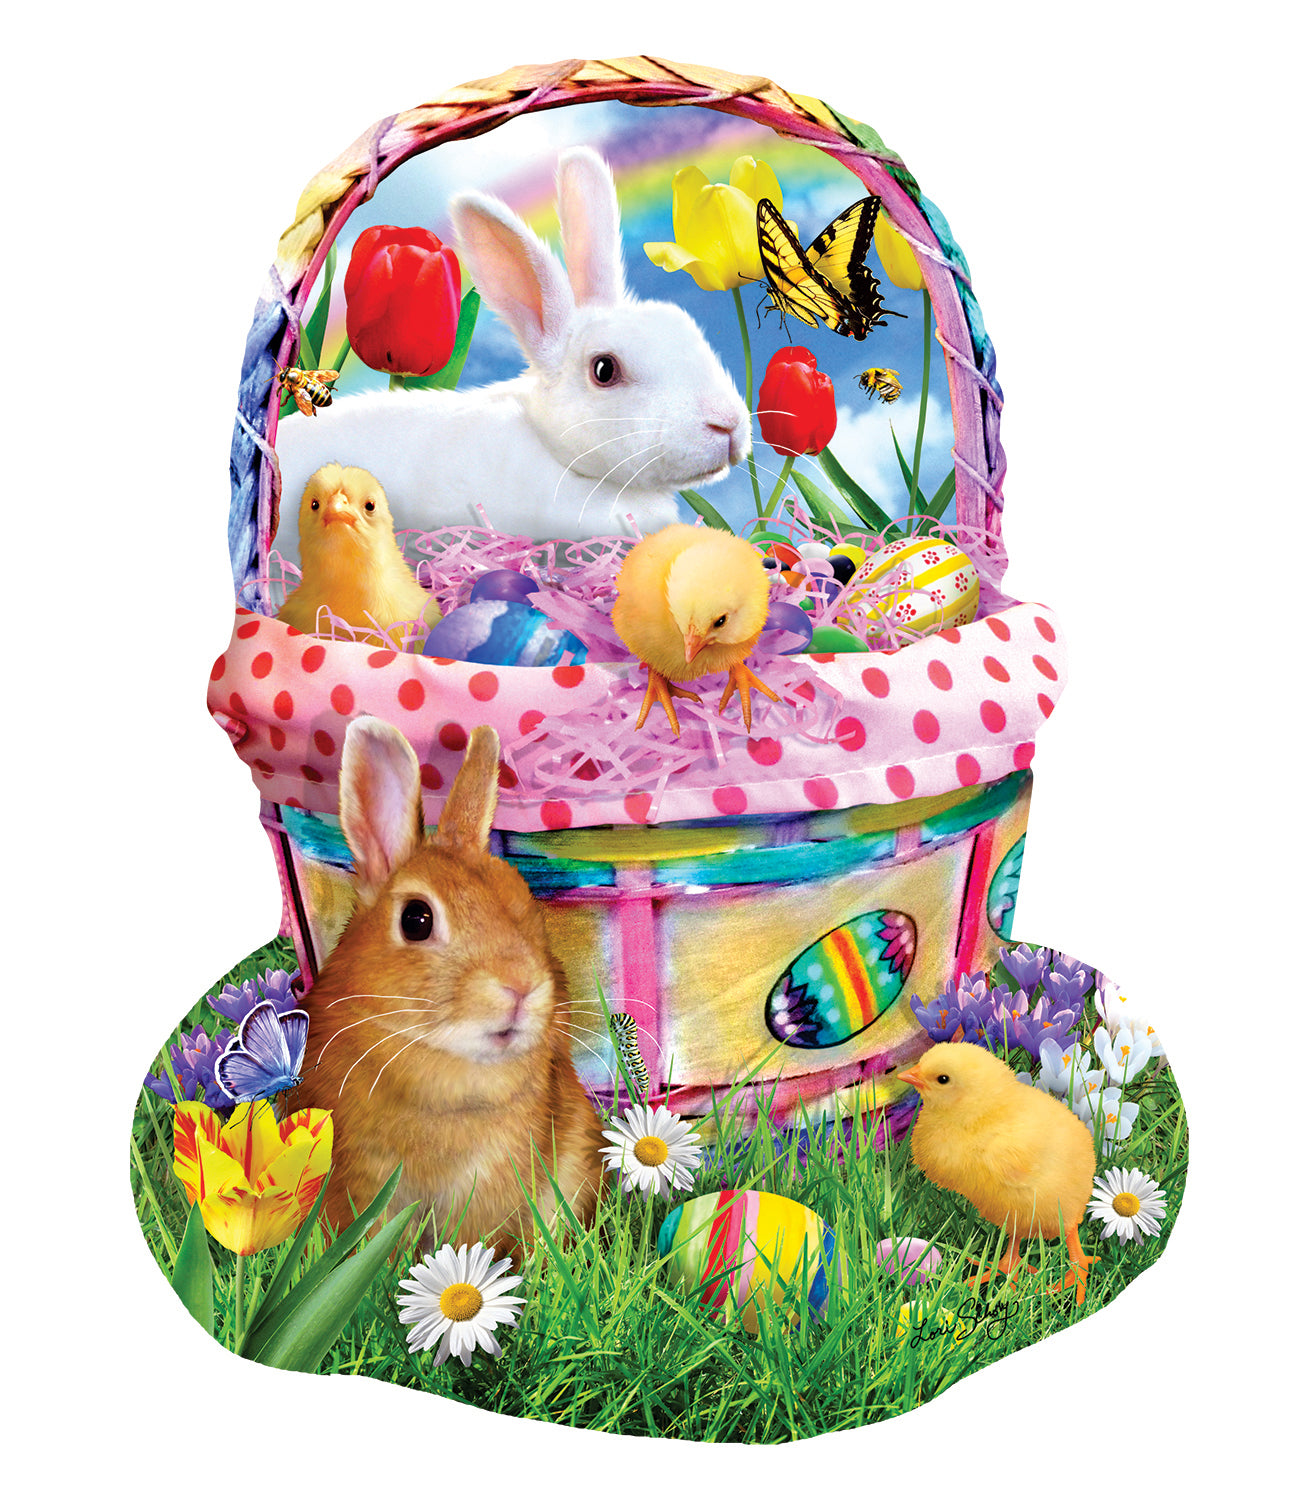 Bunny's Easter Basket- 1000pc Shaped Jigsaw Puzzle